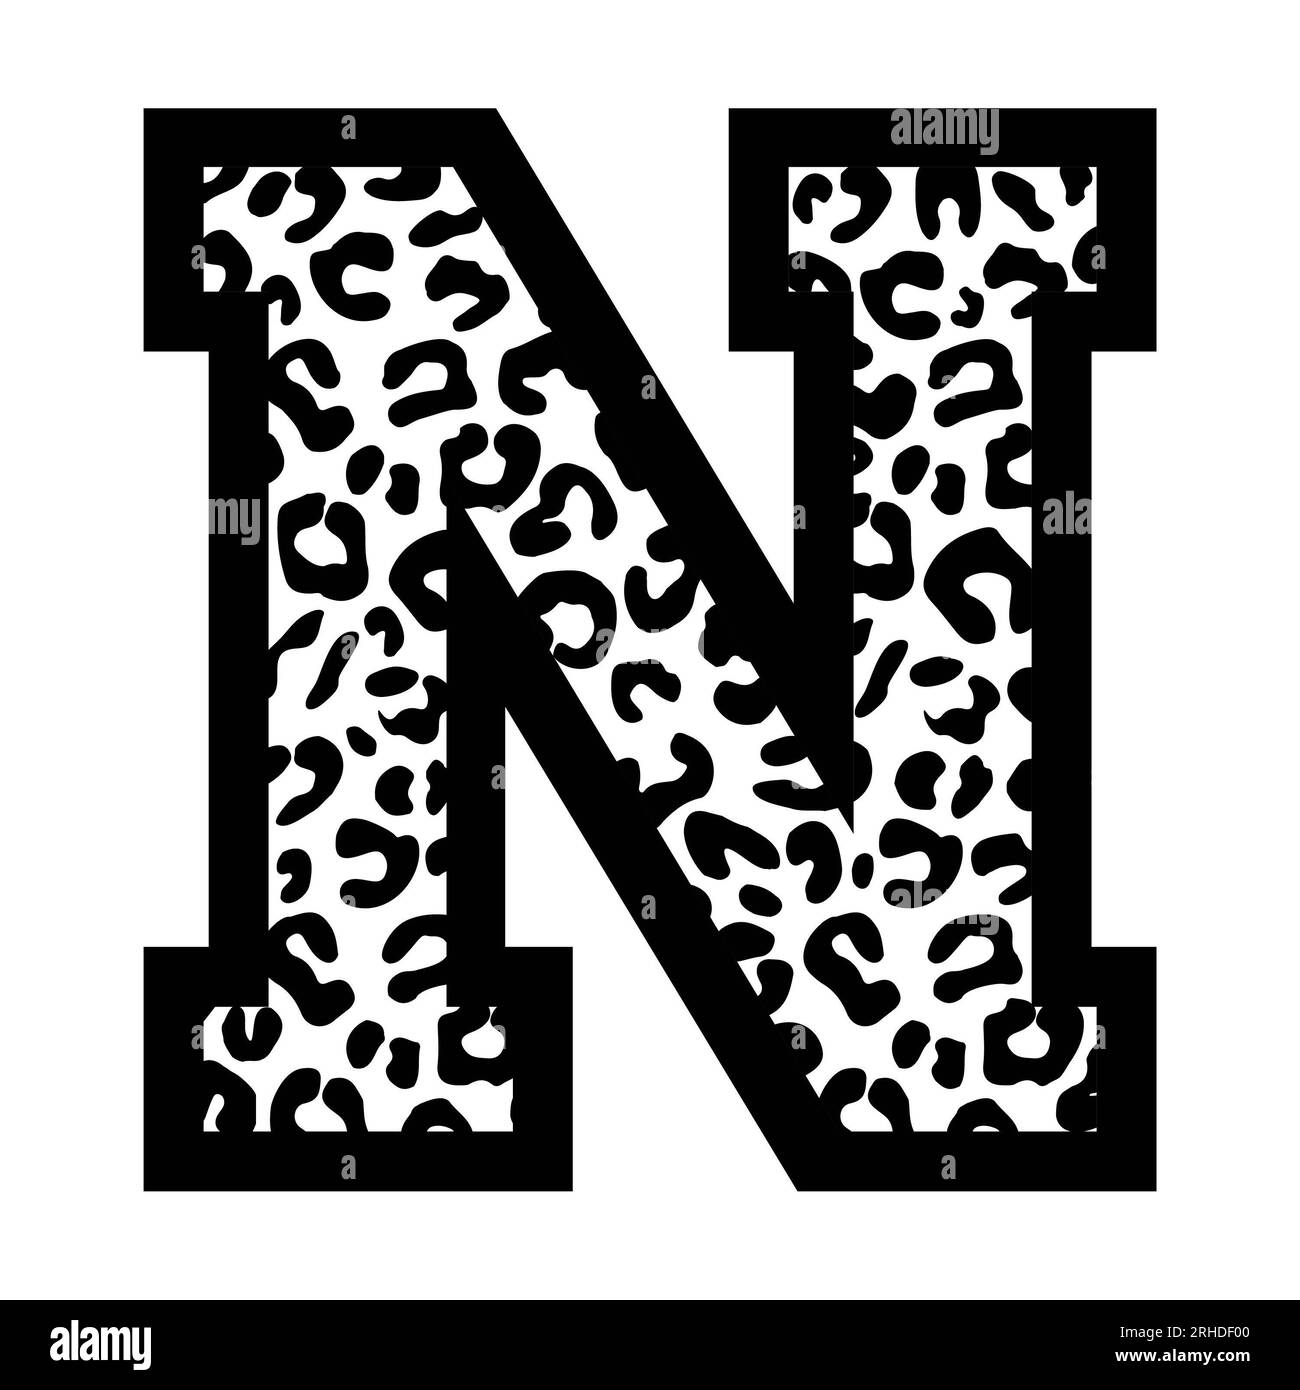 N letter leopard college sports jersey font on white background. Isolated illustration. Stock Photo